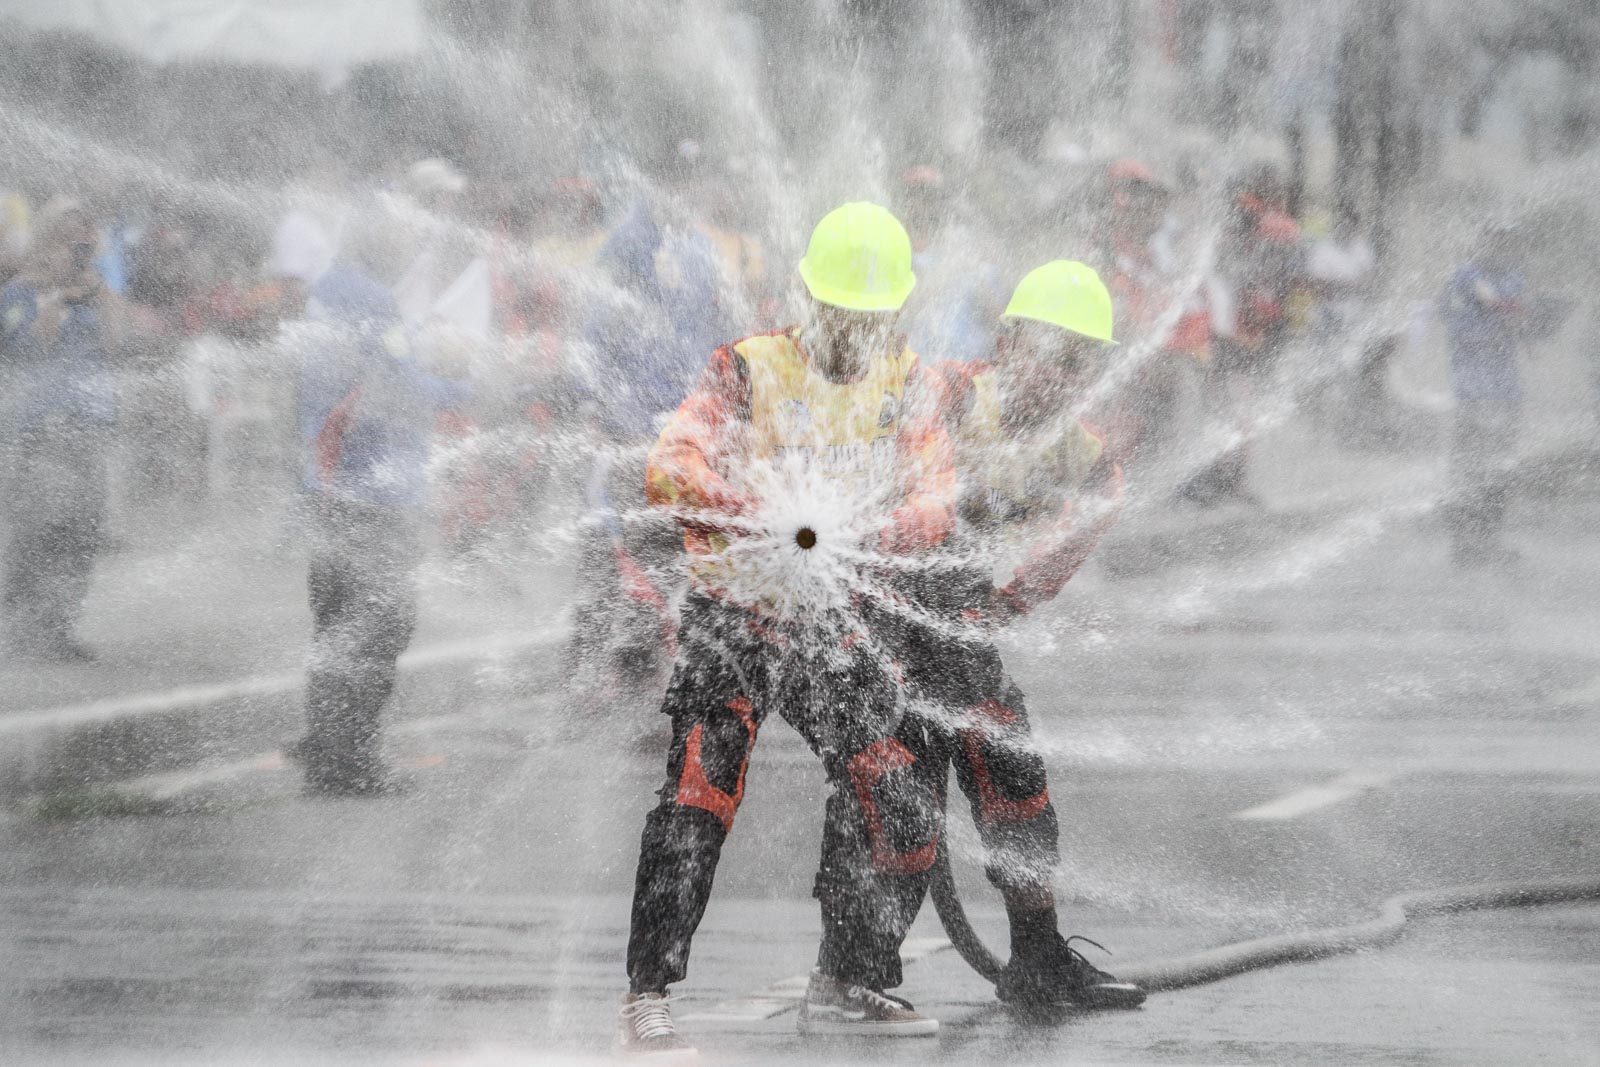 AWARENESS GAMES. Firefighters from Sulu train a firehose as they try to extinguish a fire during a competition at the 5th National Fire Olympics at Quirino Grandstand in Manila on March 13, 2019. Photo by Ben Nabong/Rappler  